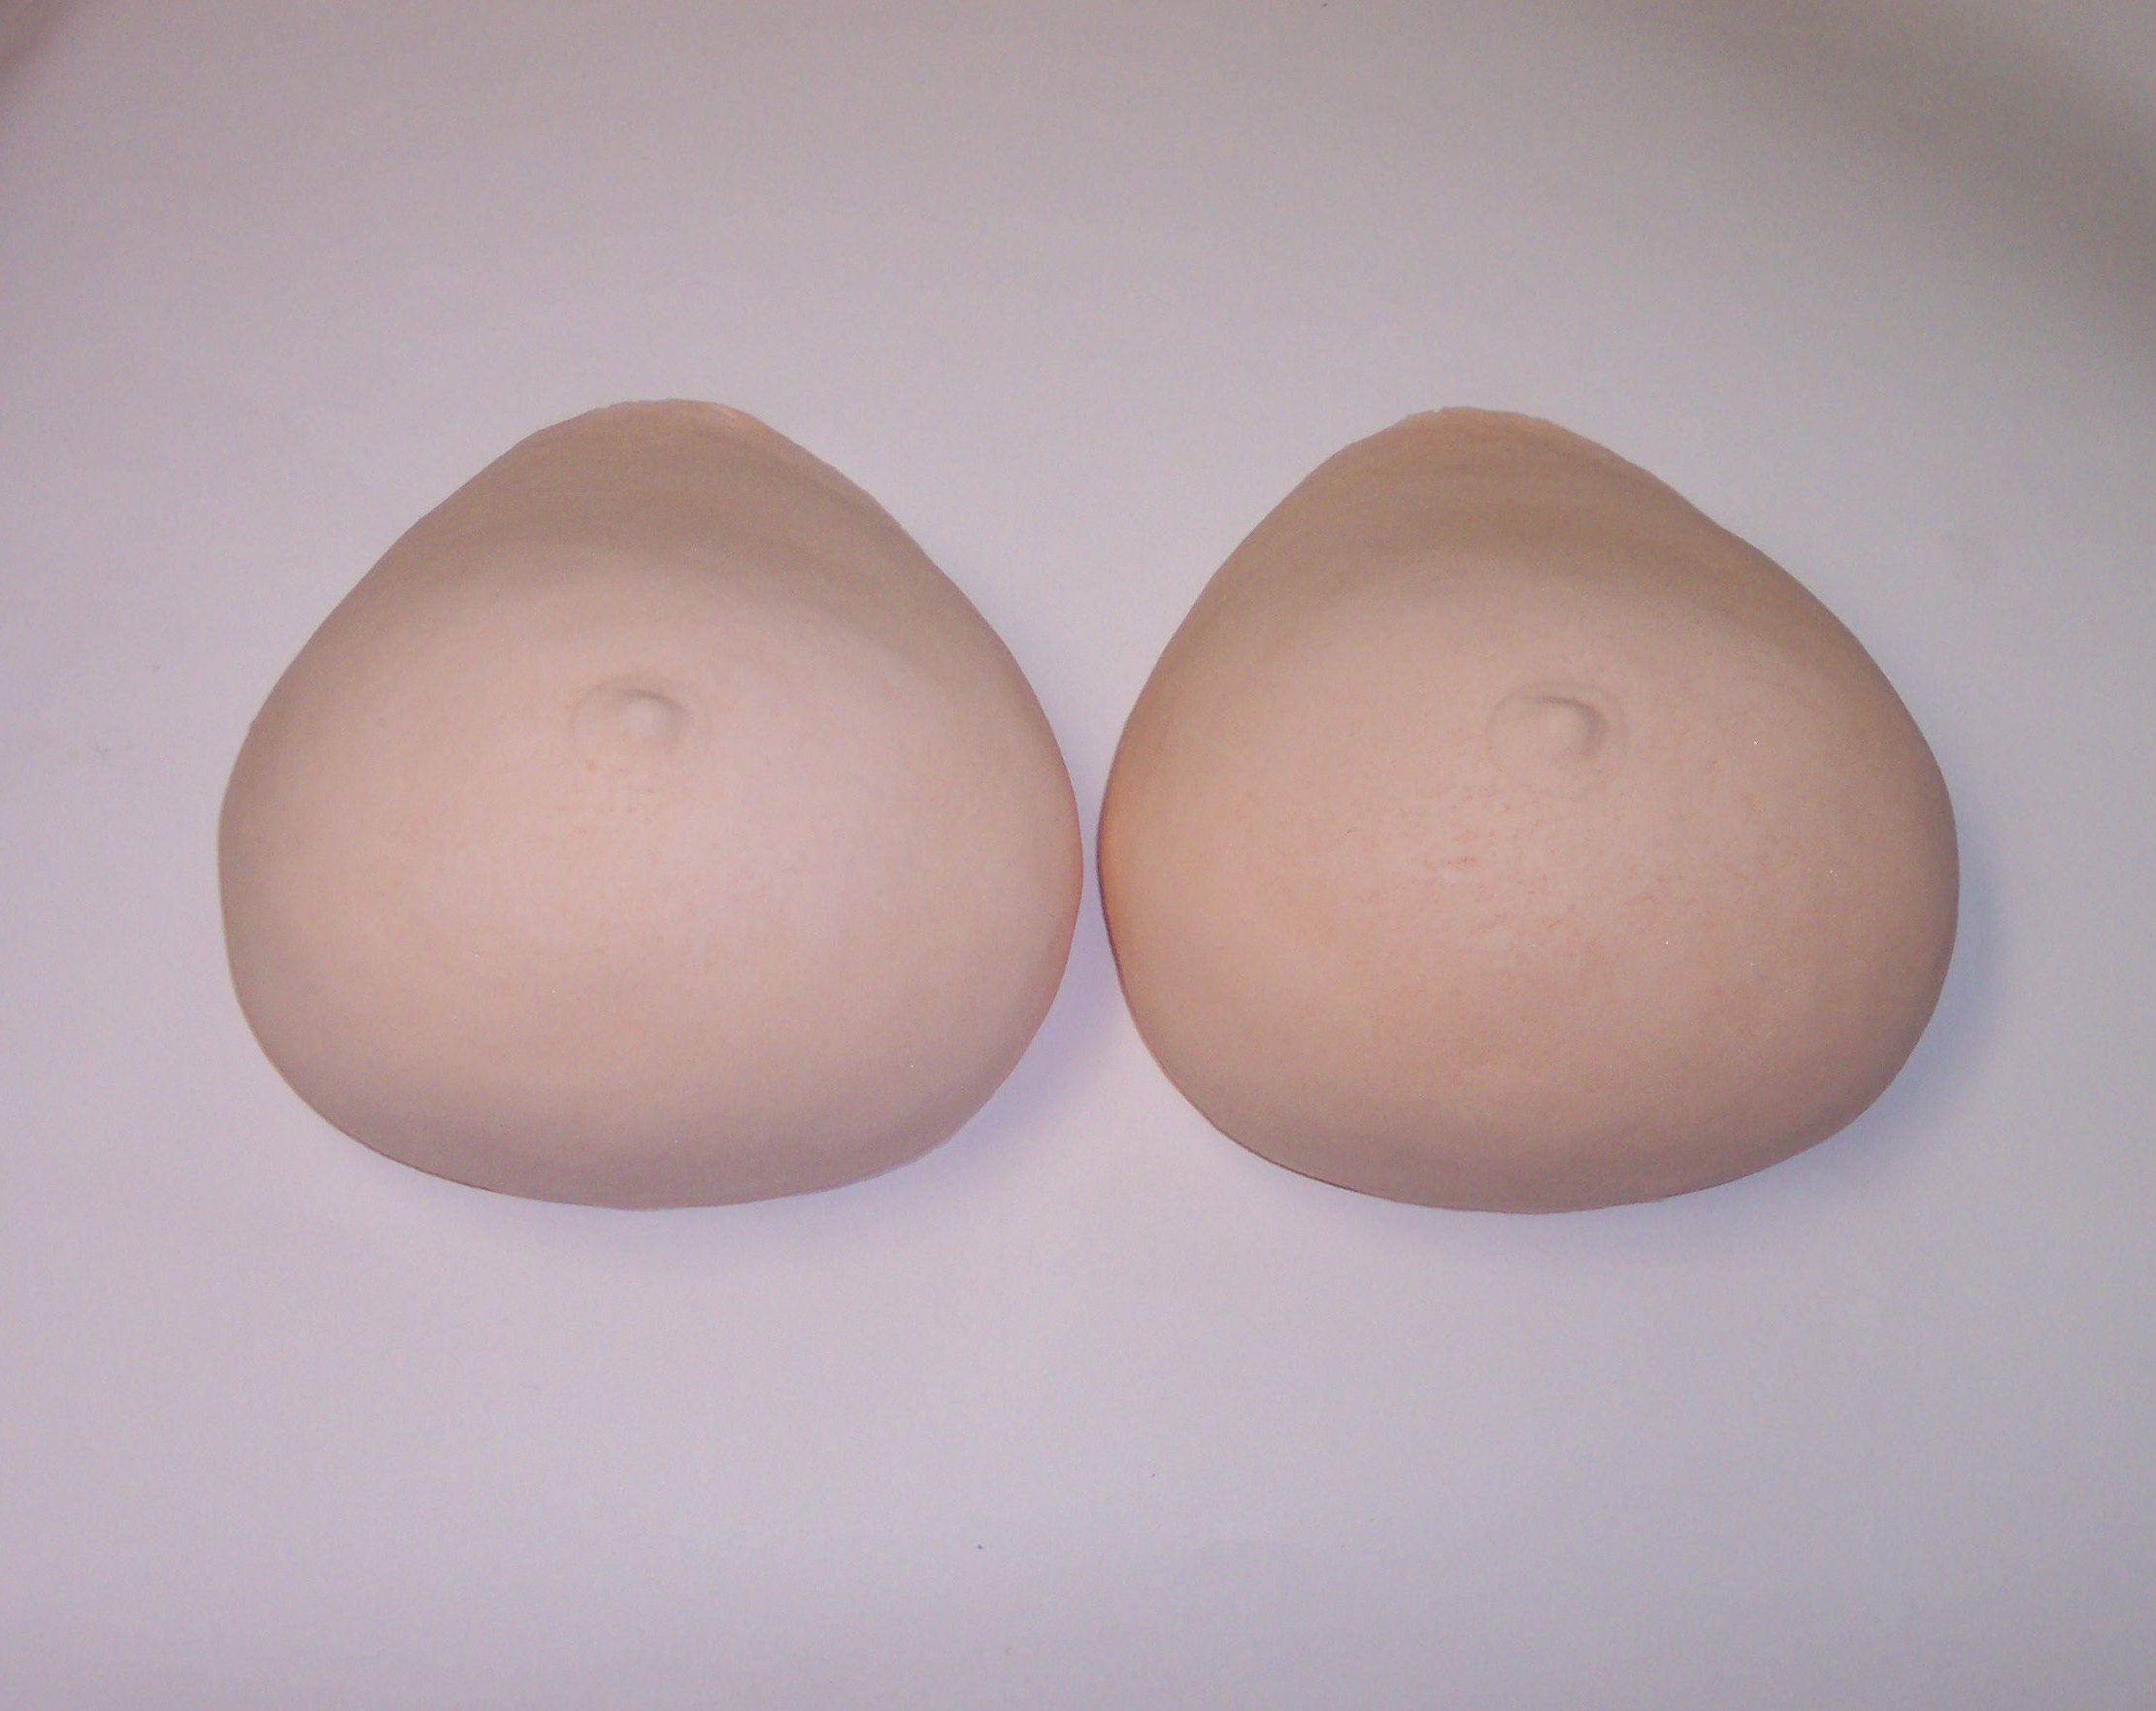 Buy Handmade F Cup Breast Form Silicone Breast Forms Pair Prosthetic for  Mastectomy, Crossplay, and Cosplay Online in India 